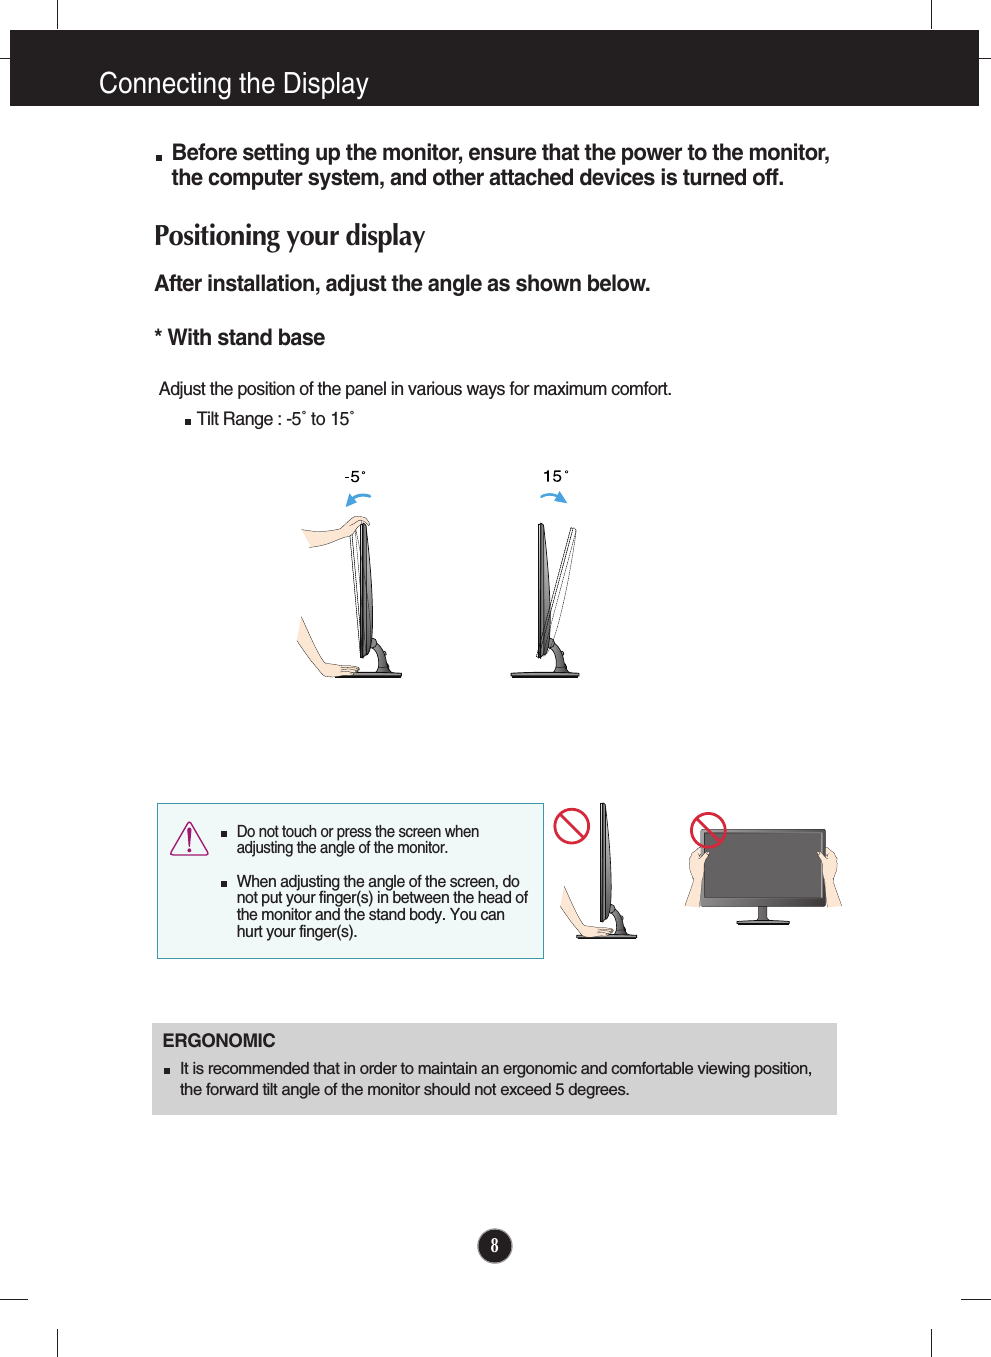 8Connecting the DisplayBefore setting up the monitor, ensure that the power to the monitor,the computer system, and other attached devices is turned off. Positioning your displayAfter installation, adjust the angle as shown below. * With stand base Adjust the position of the panel in various ways for maximum comfort.Tilt Range : -5˚ to 15˚                            ERGONOMICIt is recommended that in order to maintain an ergonomic and comfortable viewing position,the forward tilt angle of the monitor should not exceed 5 degrees.Do not touch or press the screen whenadjusting the angle of the monitor. When adjusting the angle of the screen, donot put your finger(s) in between the head ofthe monitor and the stand body. You canhurt your finger(s).